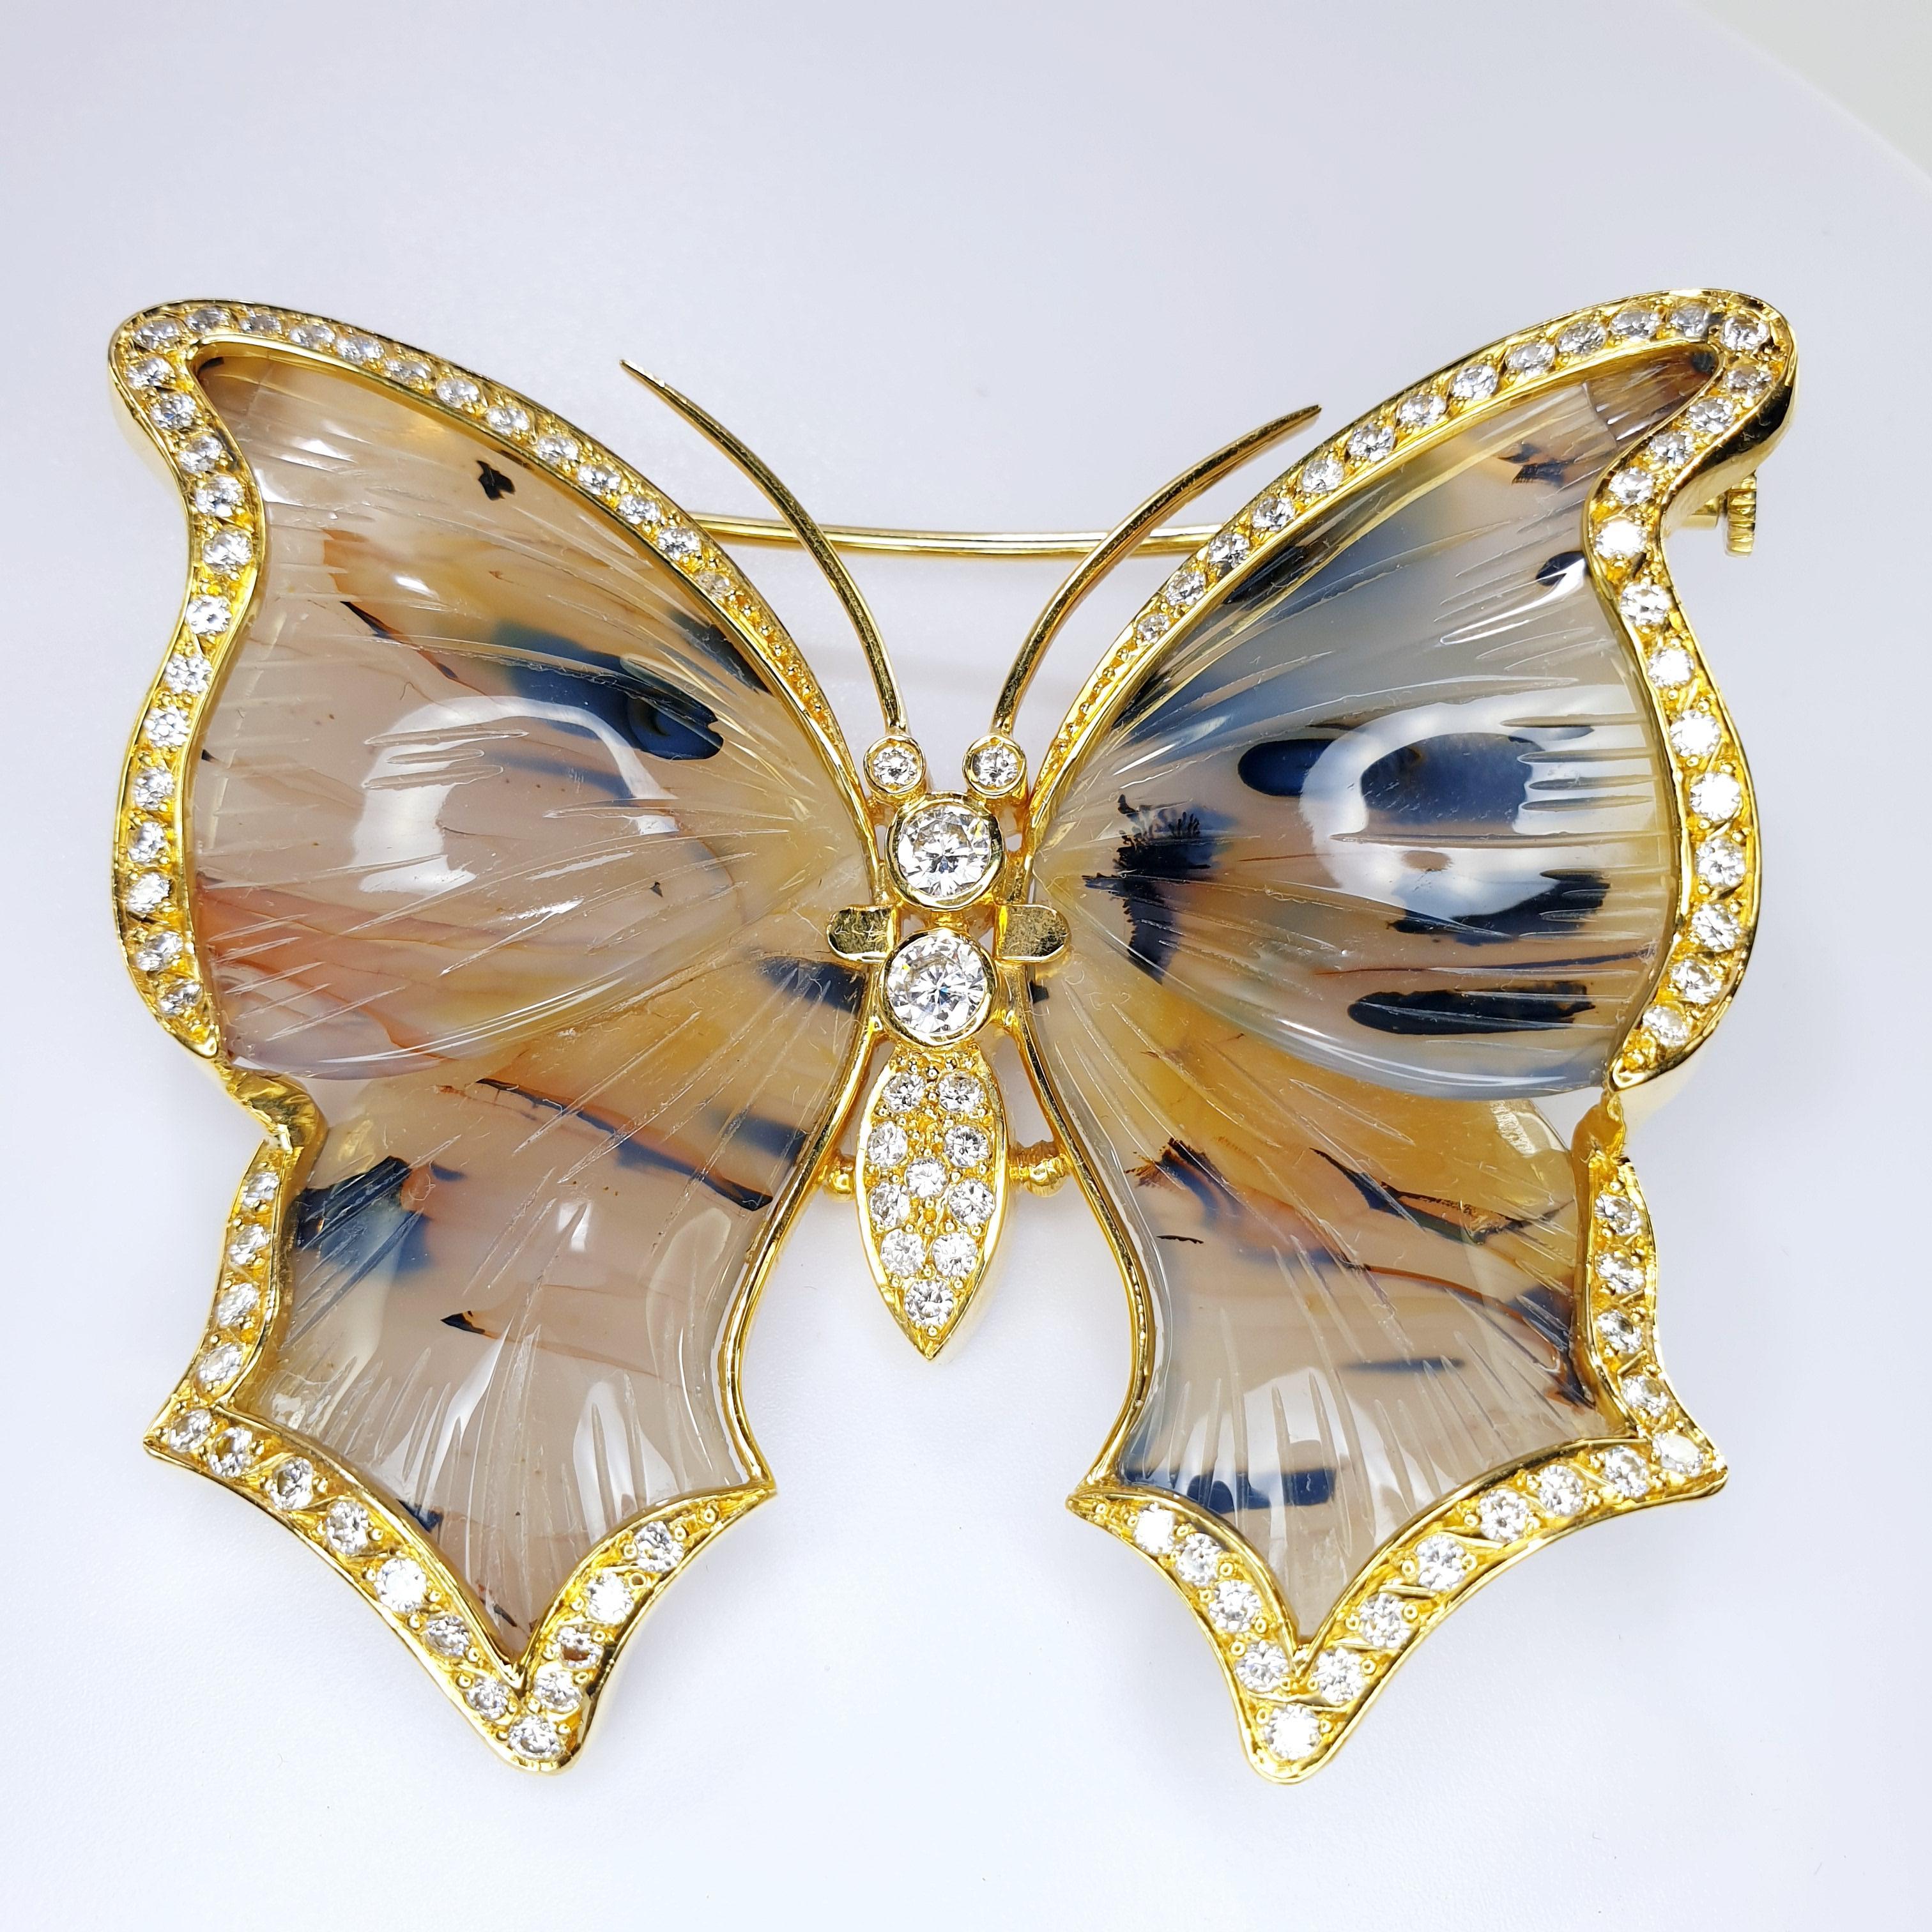 Beautiful Natural brown agate brooche in 18kt gold and diamonds 
READY TO SHIP
*Shipment of this piece is not affected by COVID-19. 
Orders welcome!*
STONES
◘ 2 center diamonds of 0.18ct each total 0.36ct 
and 0.20ct of pavé diamonds around the